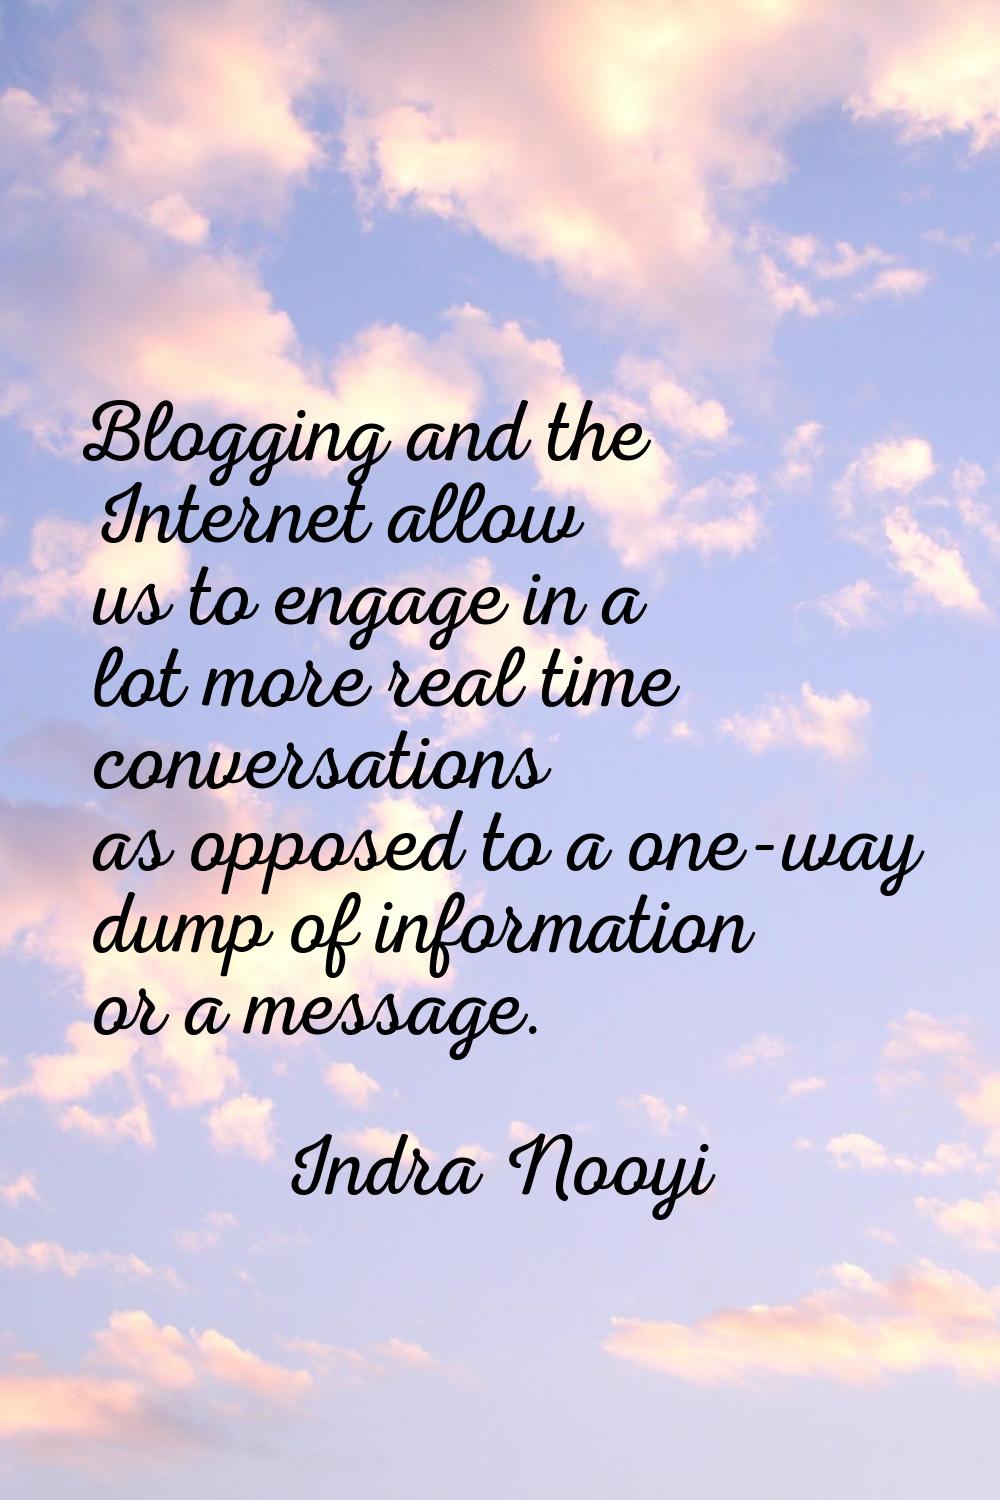 Blogging and the Internet allow us to engage in a lot more real time conversations as opposed to a 